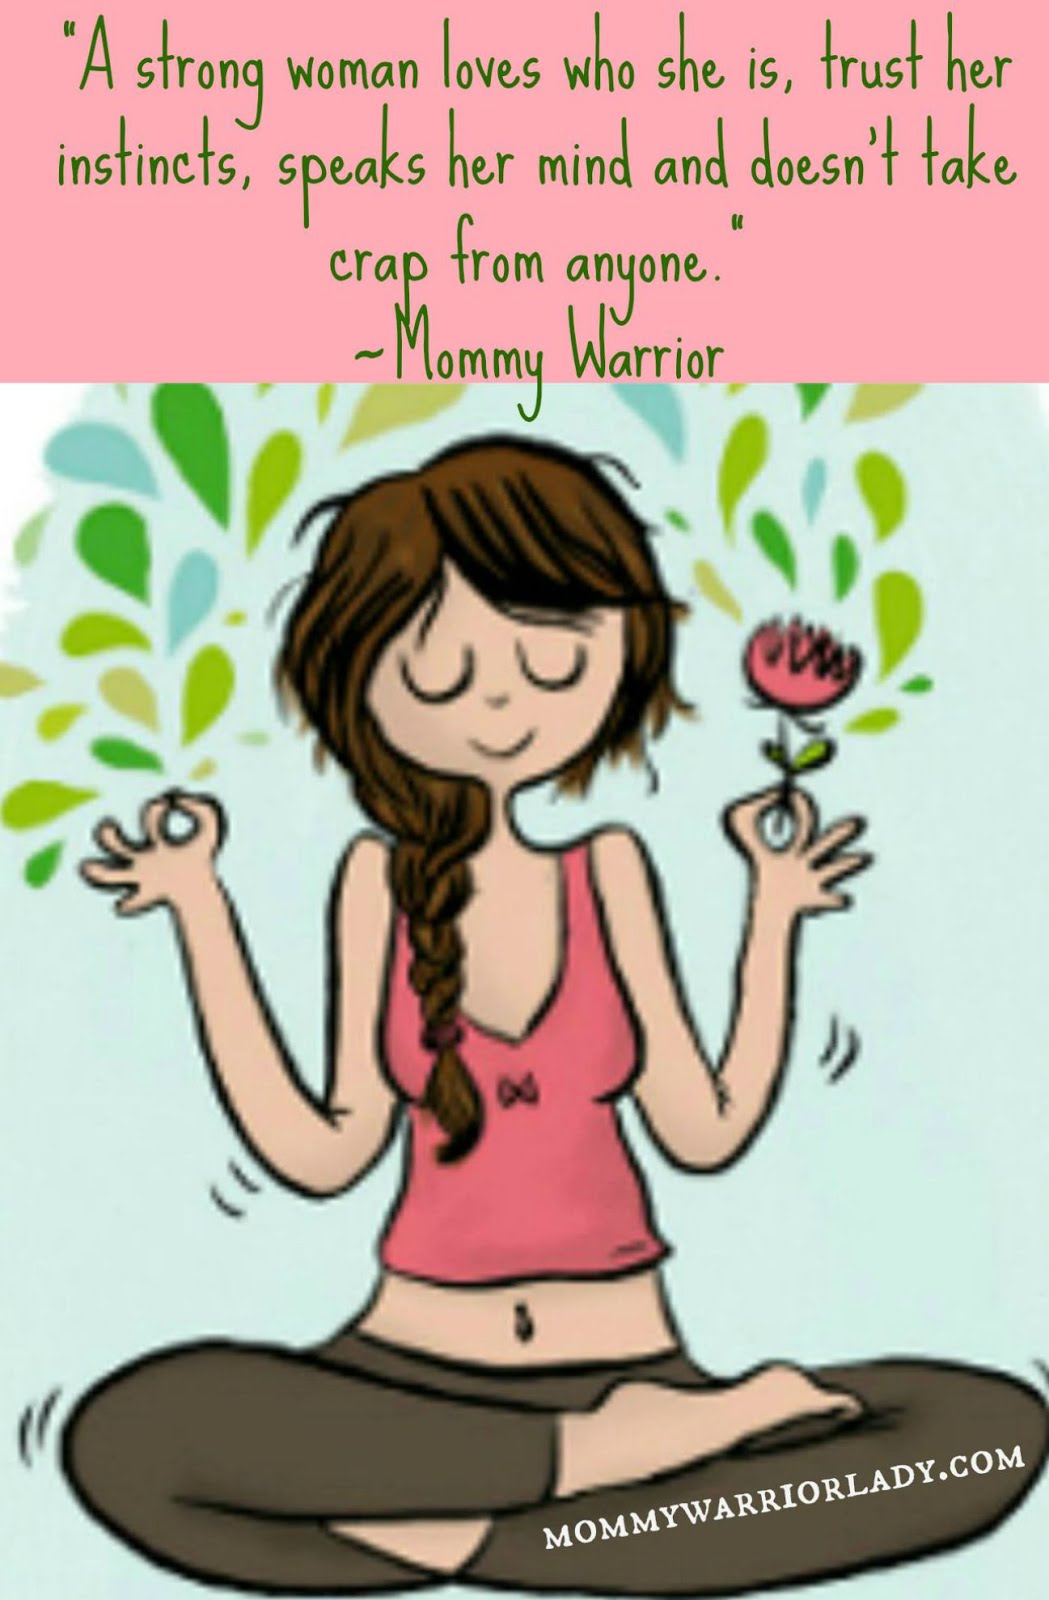 MOMMY WARRIOR : ARE YOU ALWAYS LOSING YOUR CELL PHONE OR KEYS?